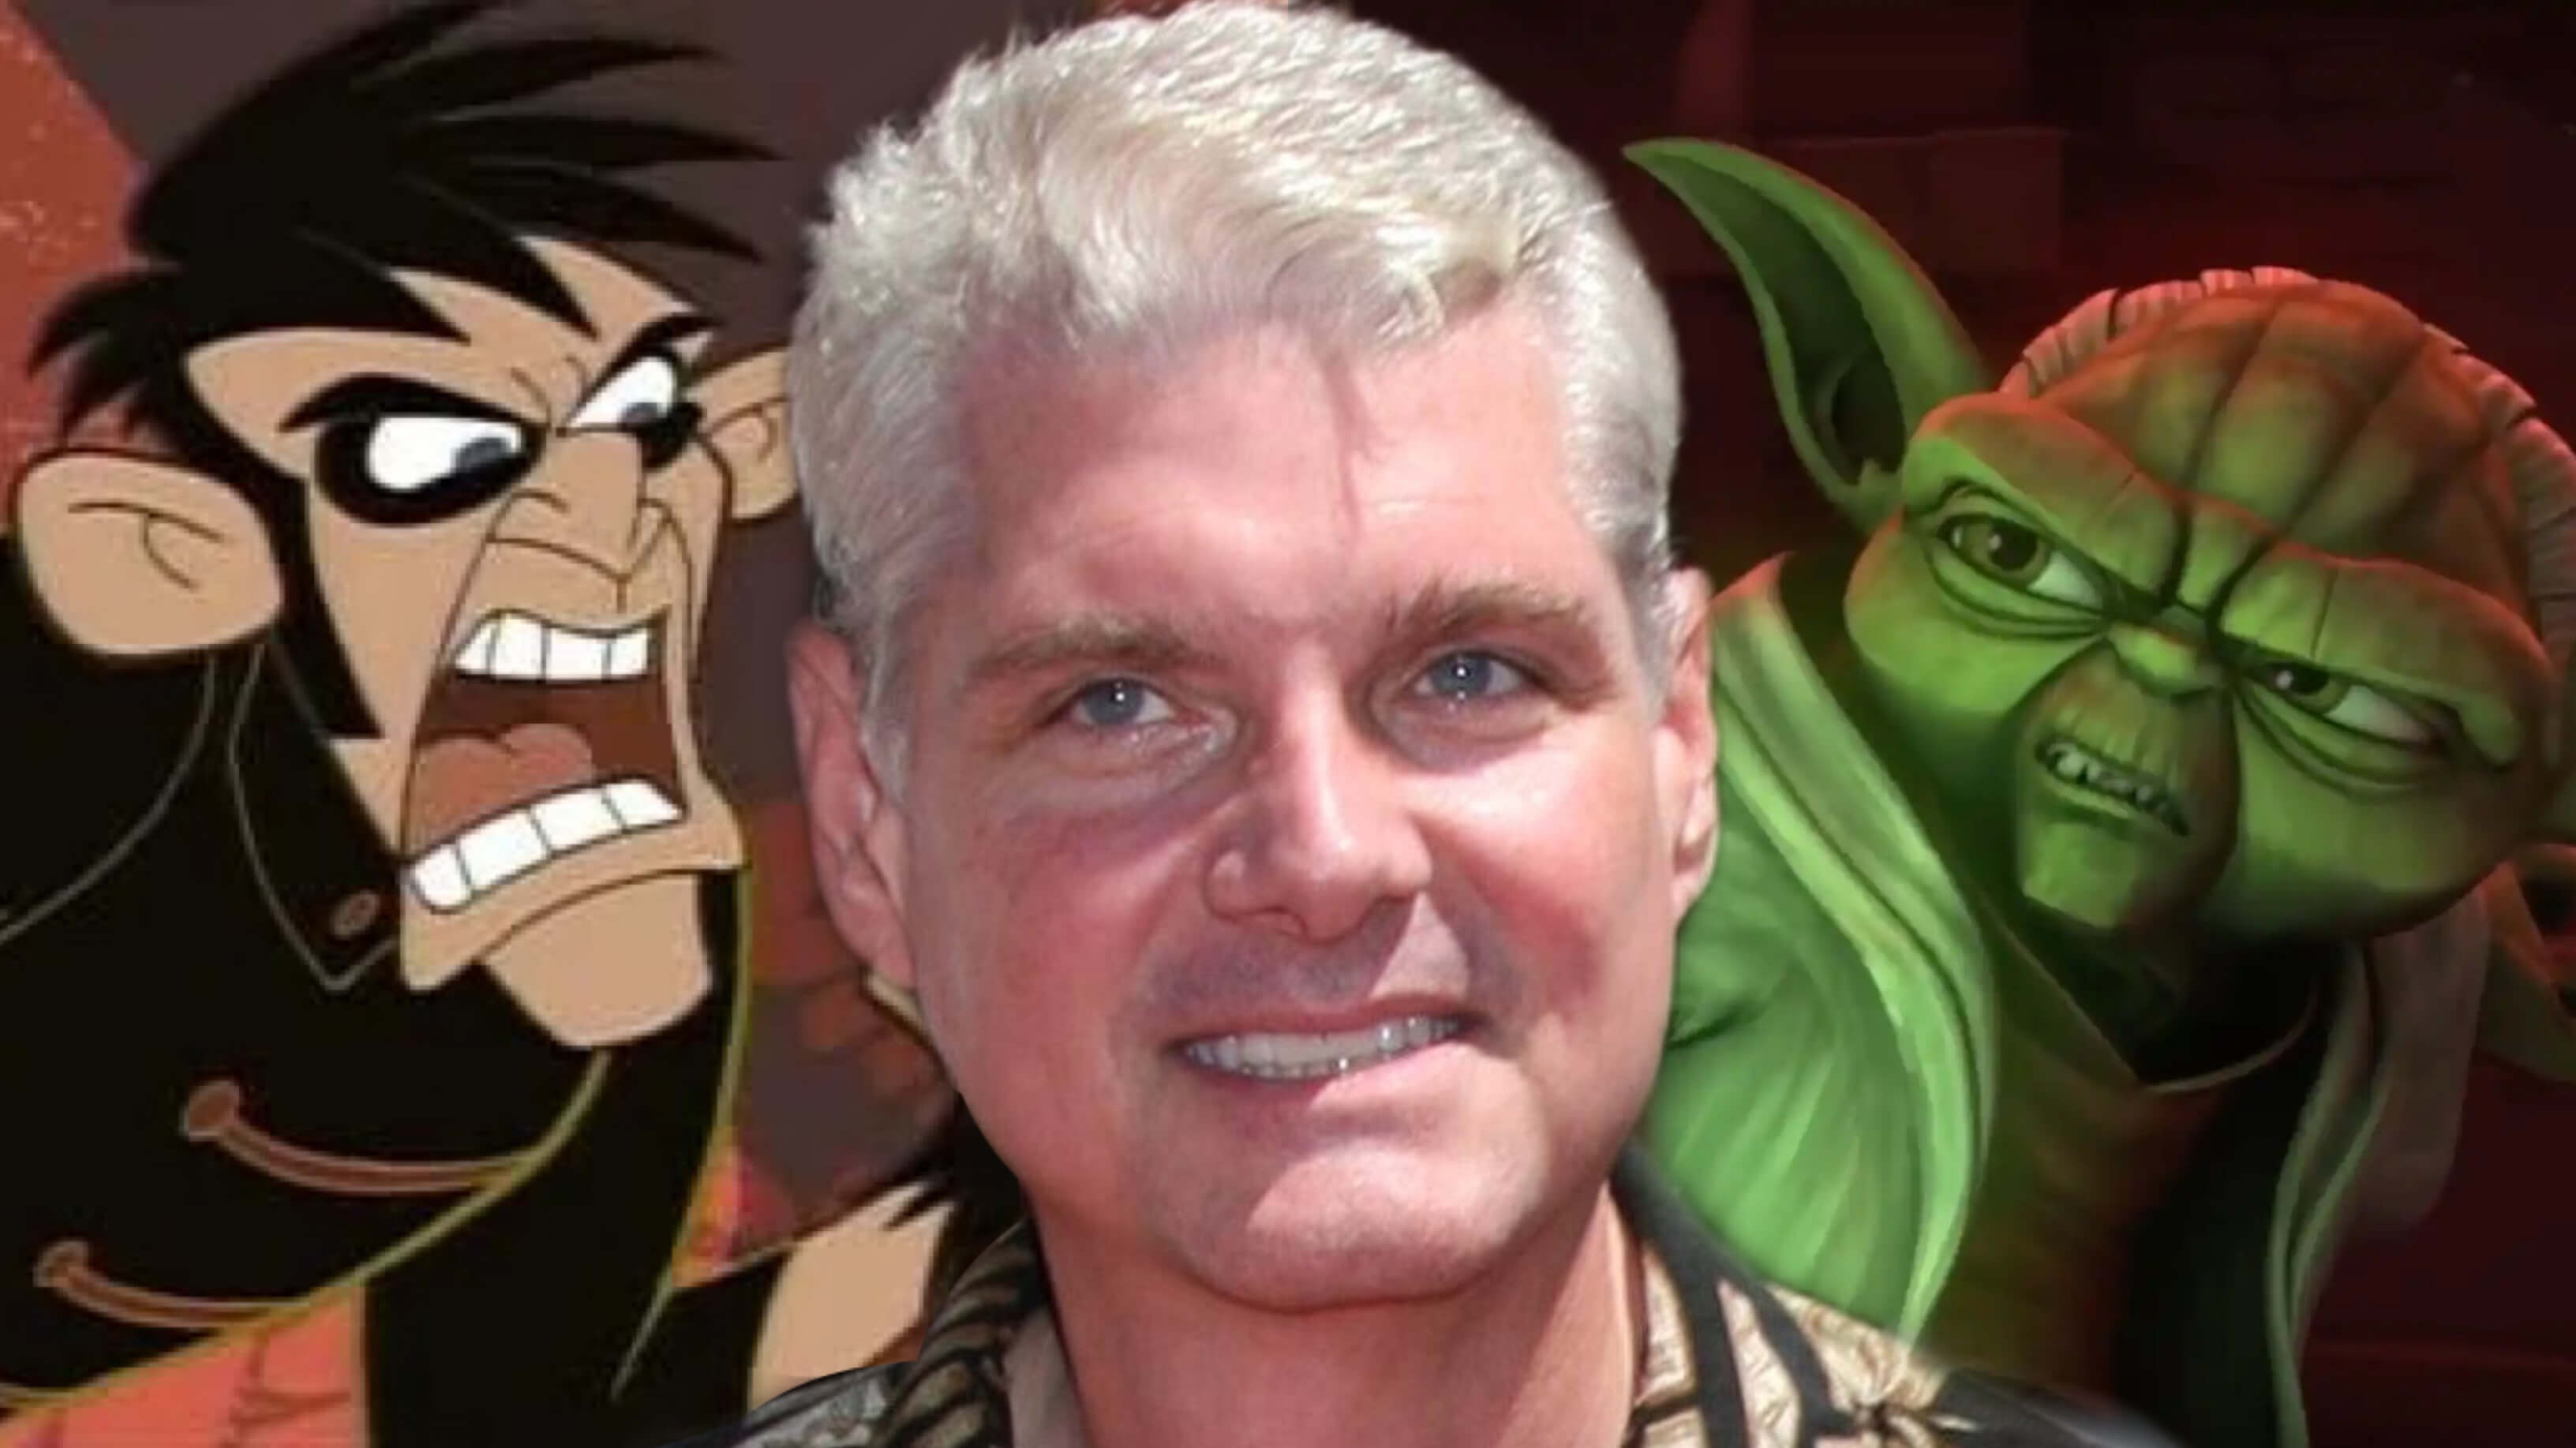 ’Star Wars’ and ’Kim Possible’ Voice Actor Tom Kane Suffers Stroke, May Never Voice Act Again